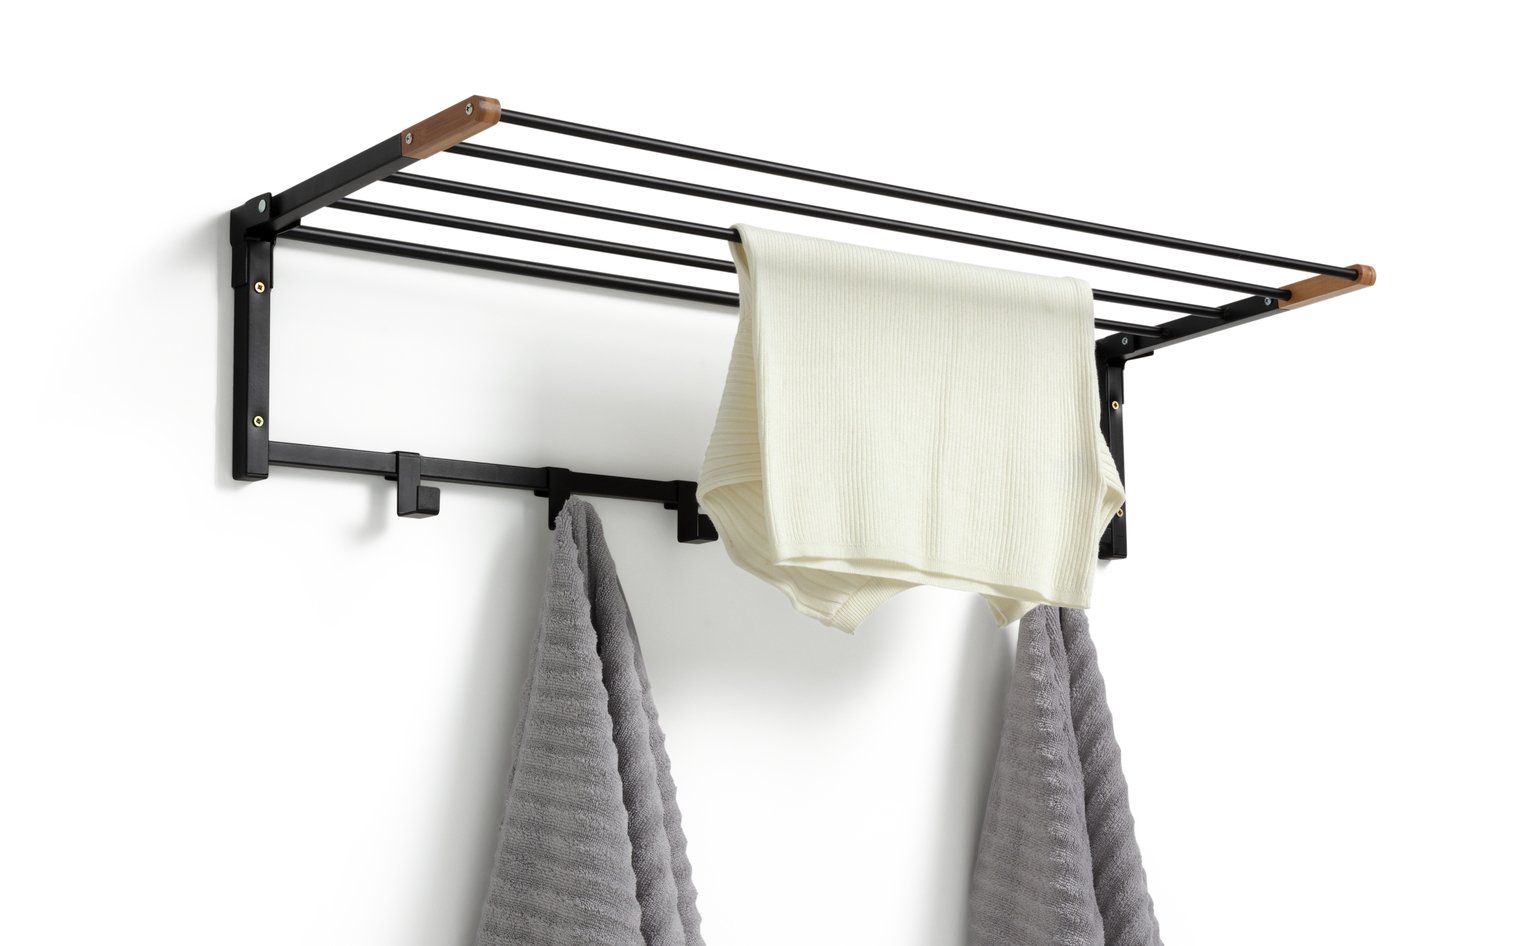 Argos Home 4.5m Wall Mounted Clothes Airer with Hooks